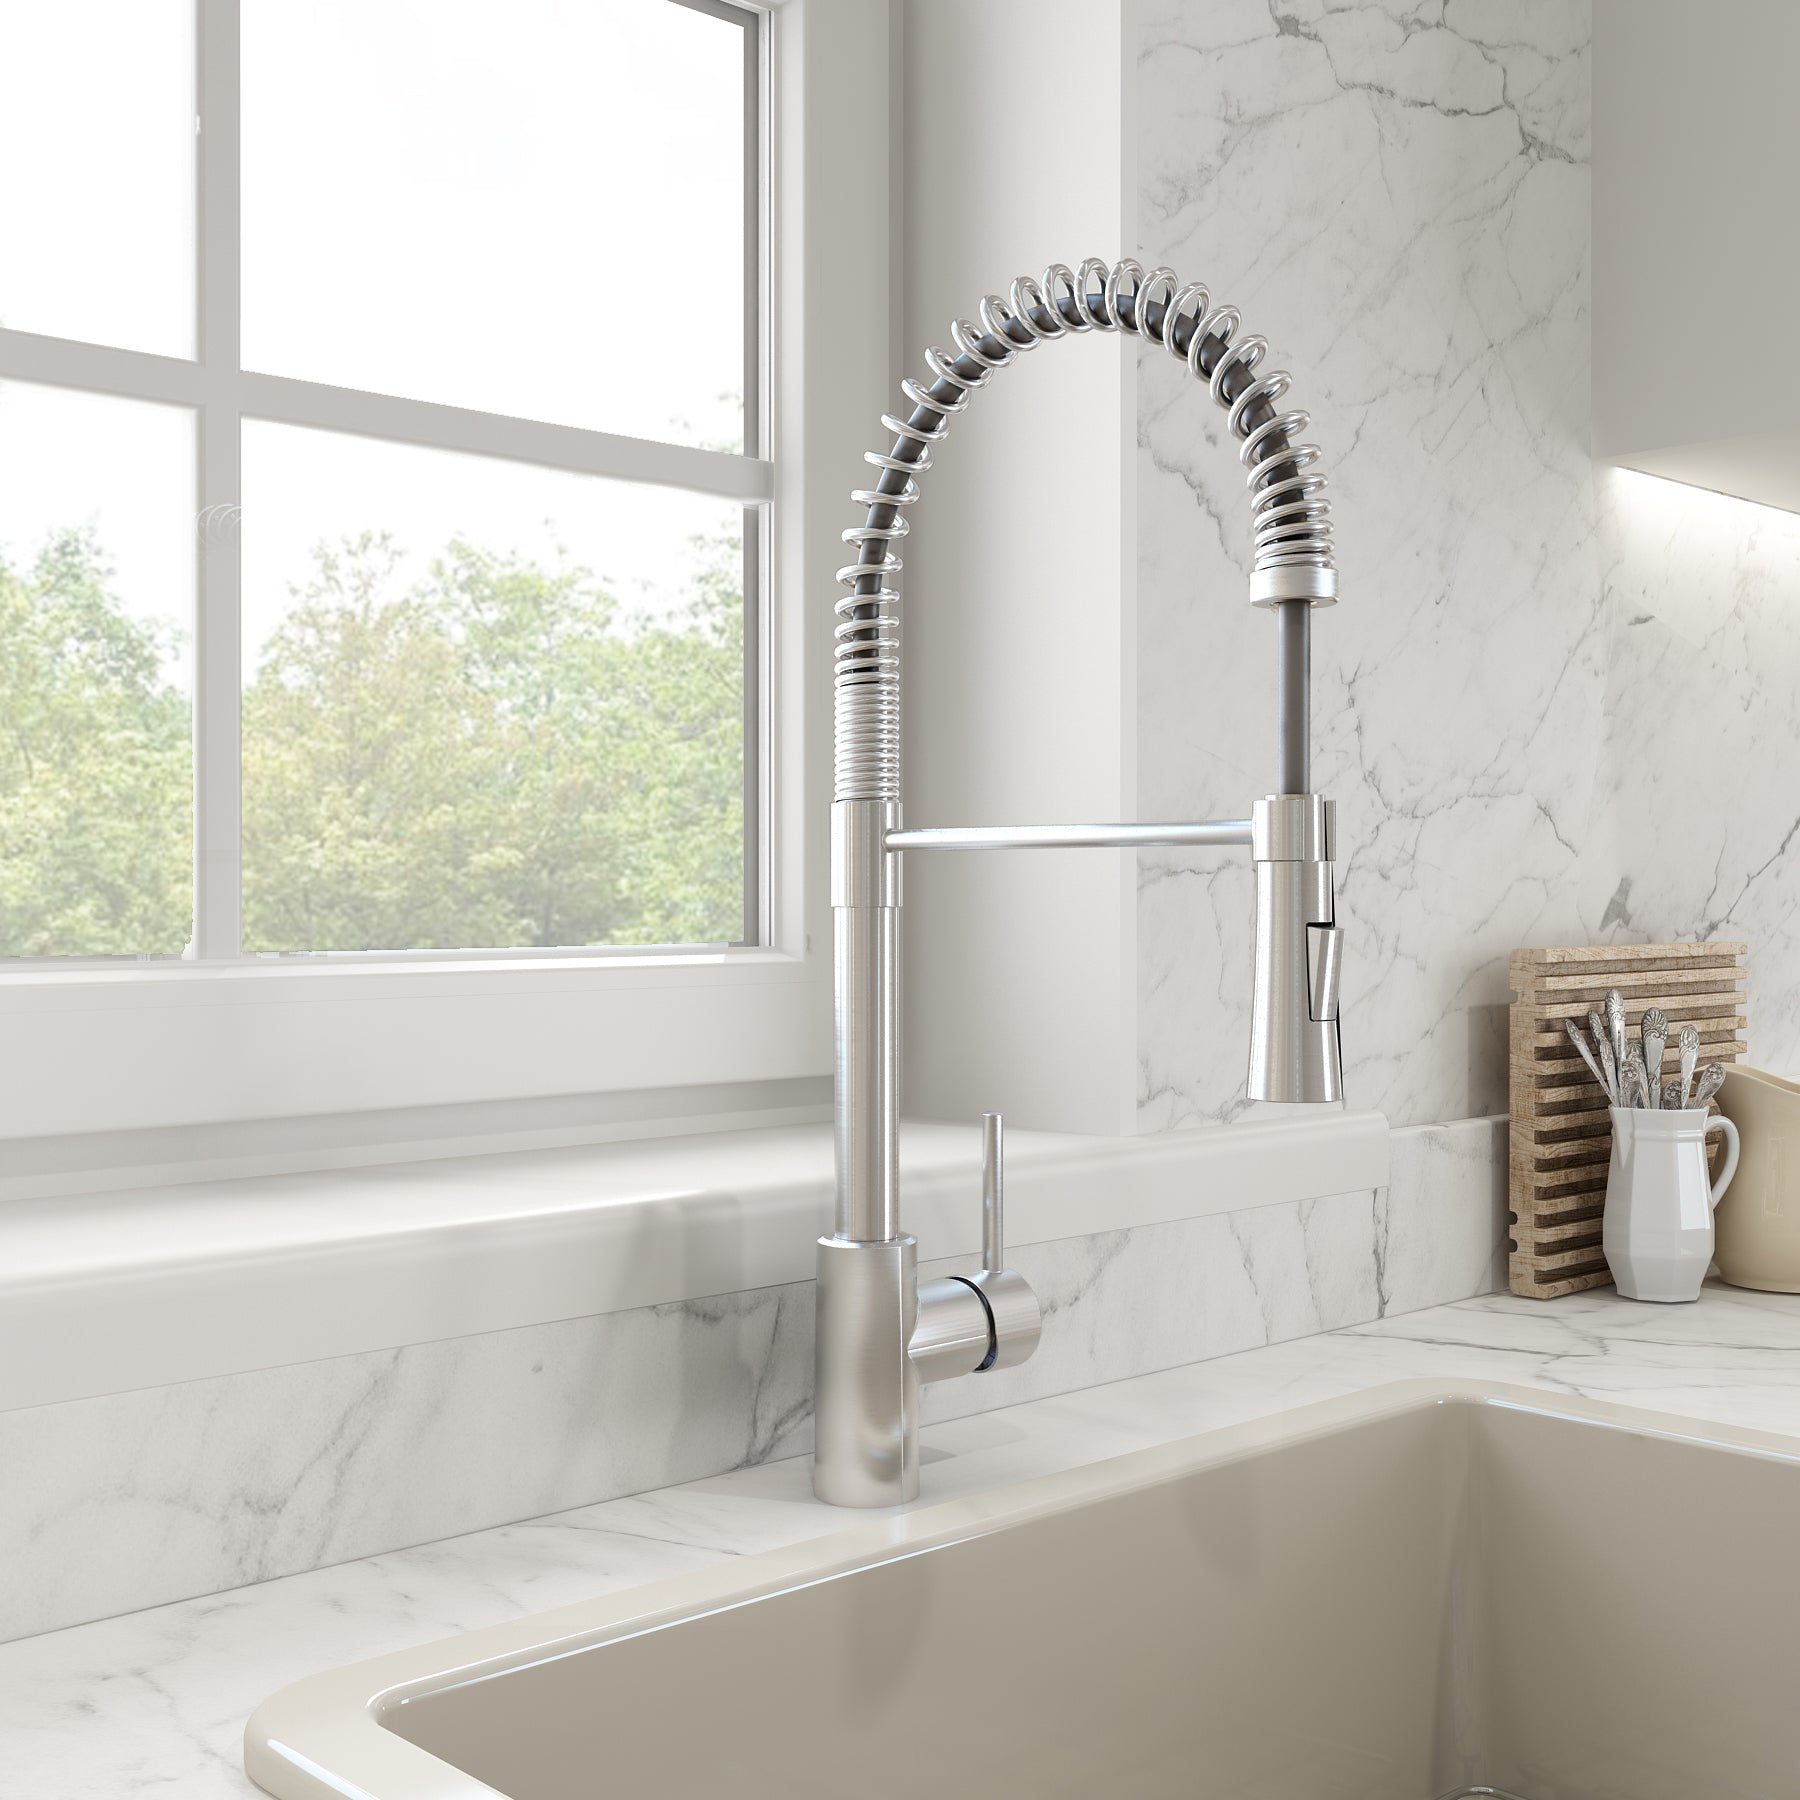 Kohler Sous Pull-Down Faucet Review: Just Like The Pros